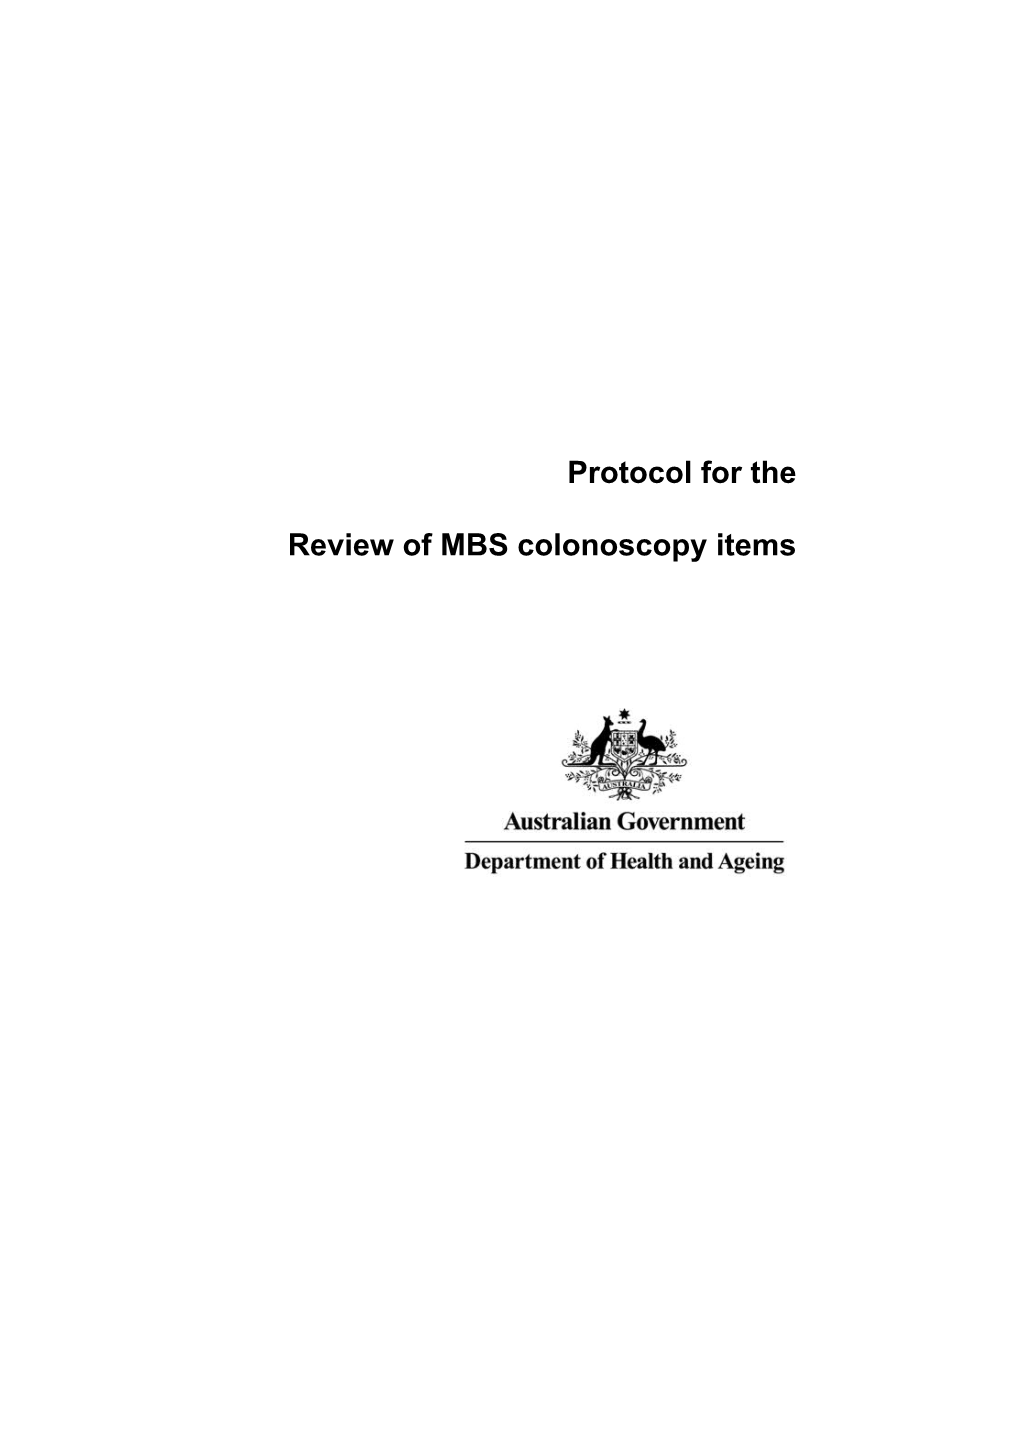 Draft Review Protocol - Review of MBS Colonoscopy Items